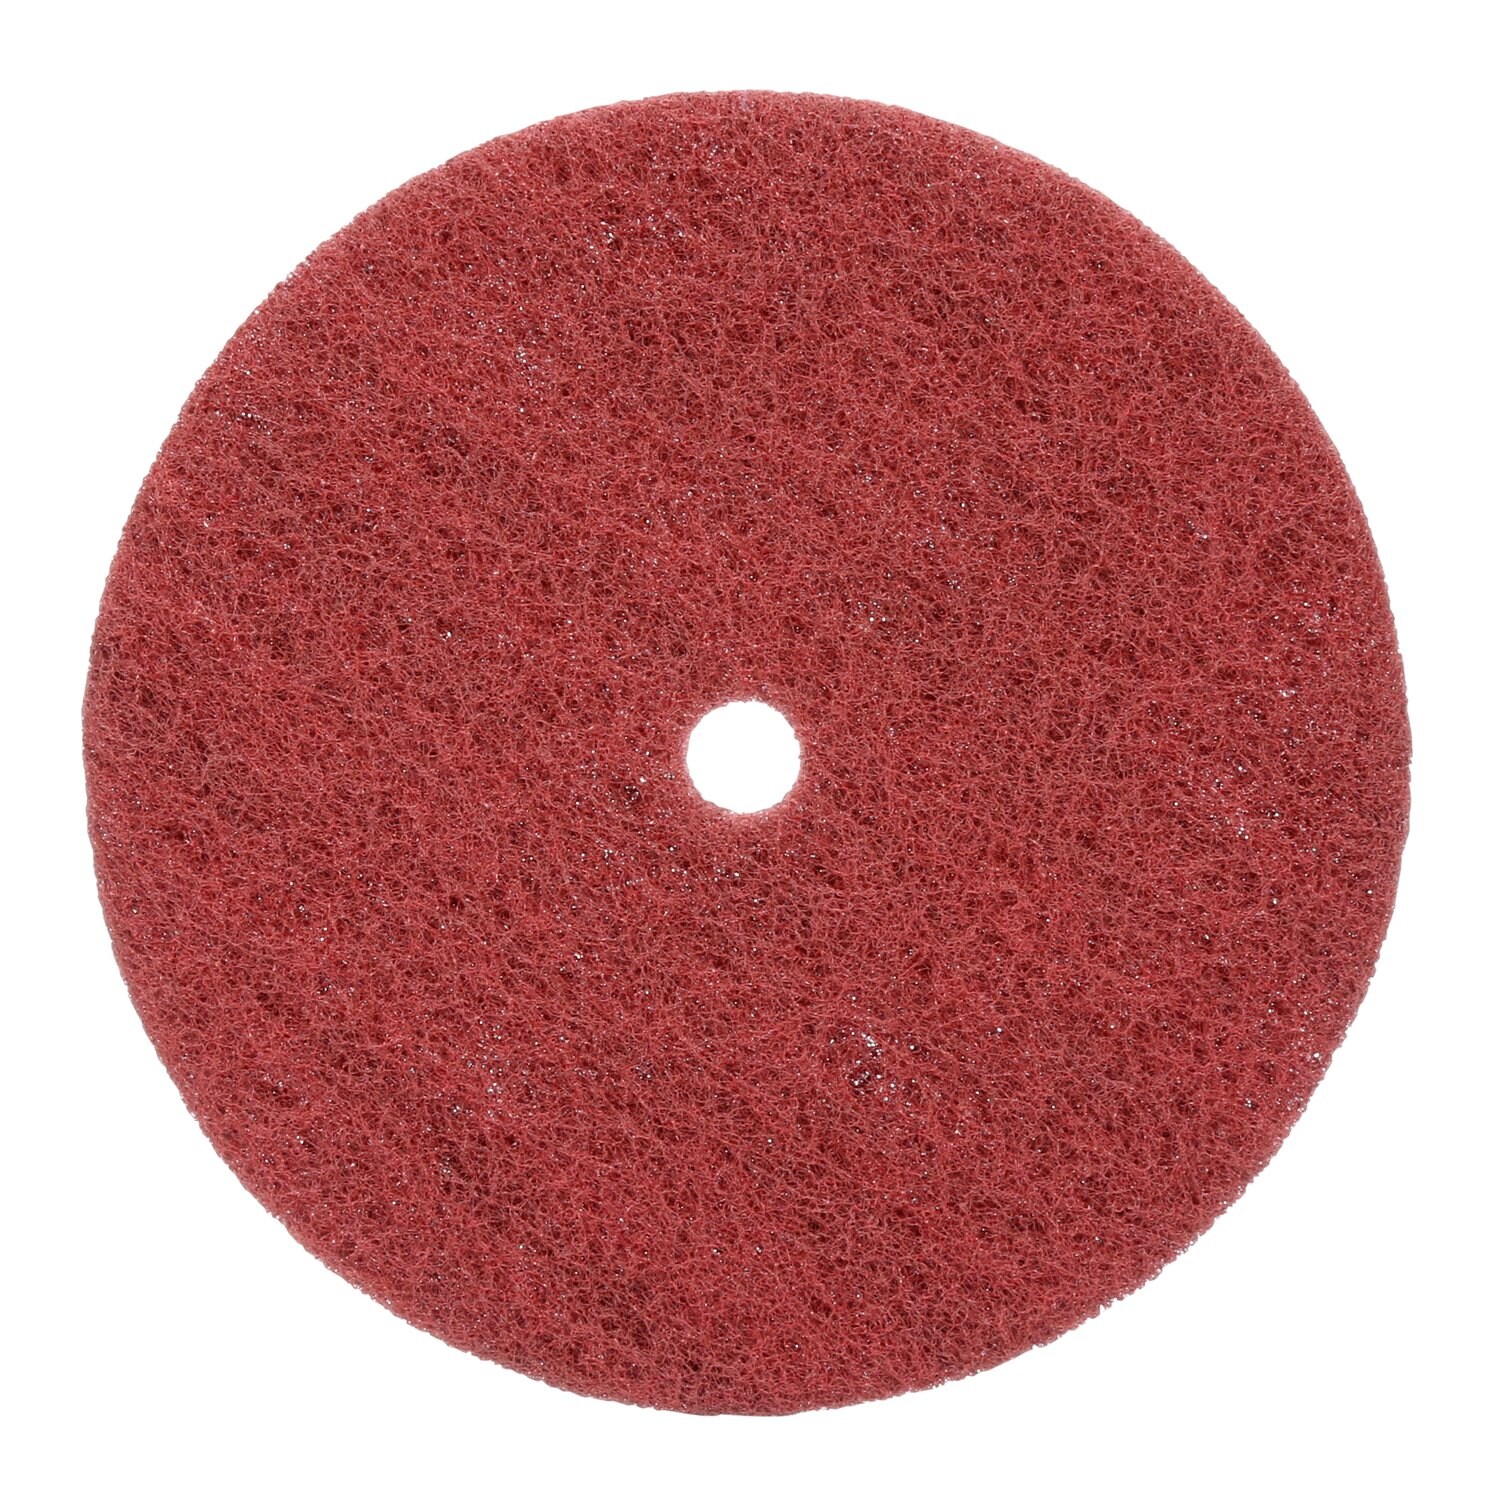 7000046751 - Standard Abrasives Buff and Blend HS Disc, 860708, 6 in x 1/2 in A VFN,
10/Pac, 100 ea/Case